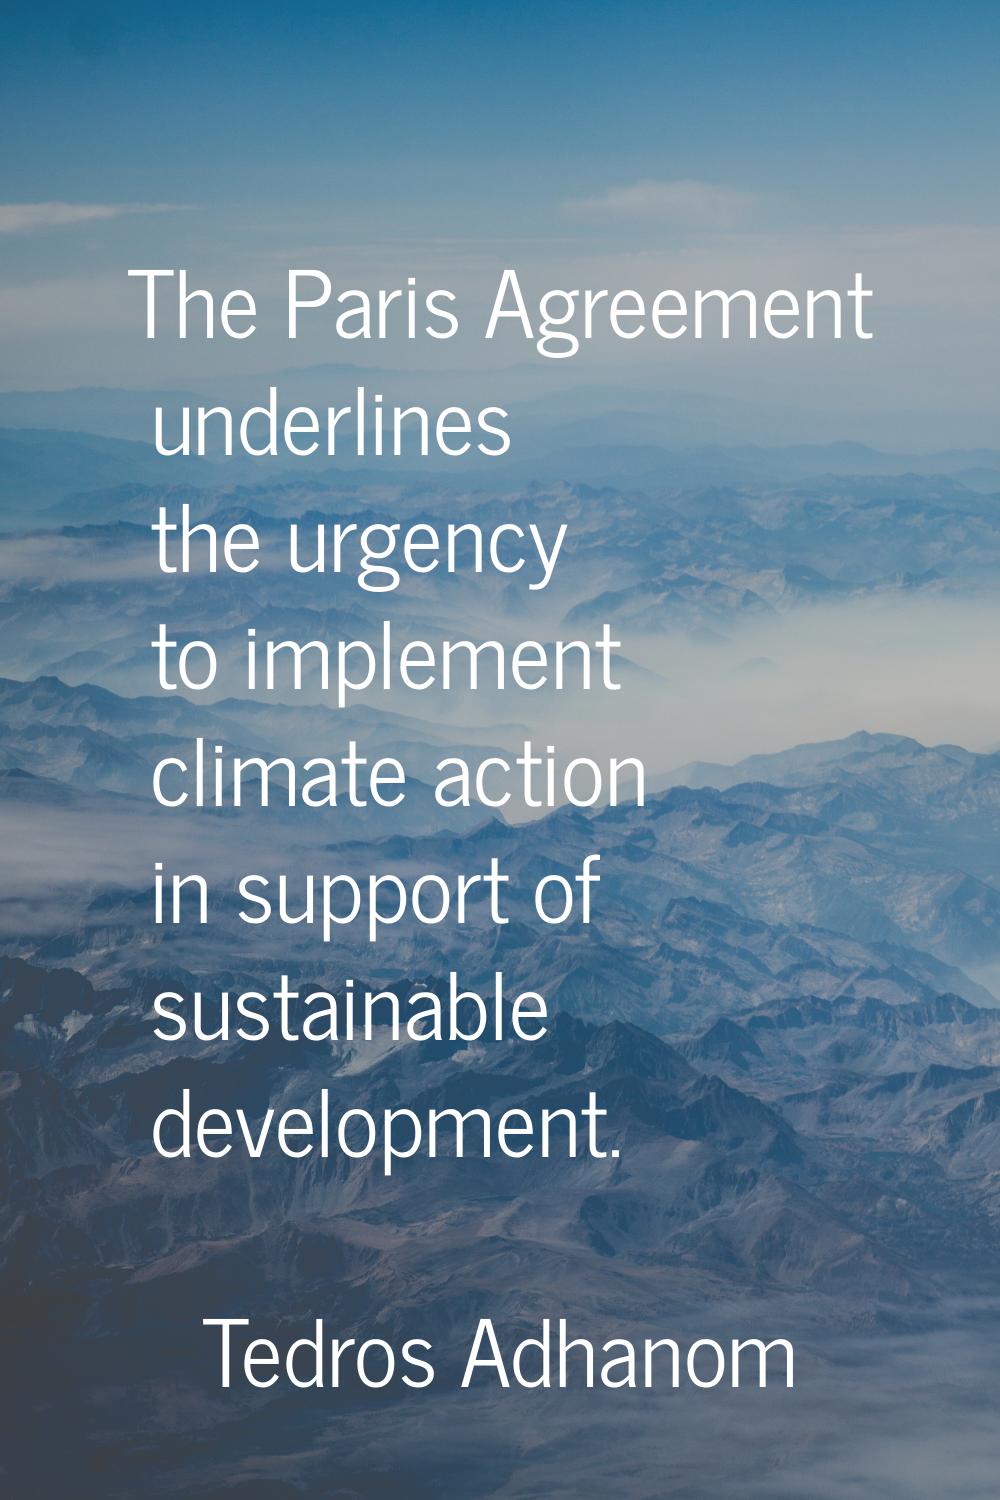 The Paris Agreement underlines the urgency to implement climate action in support of sustainable de